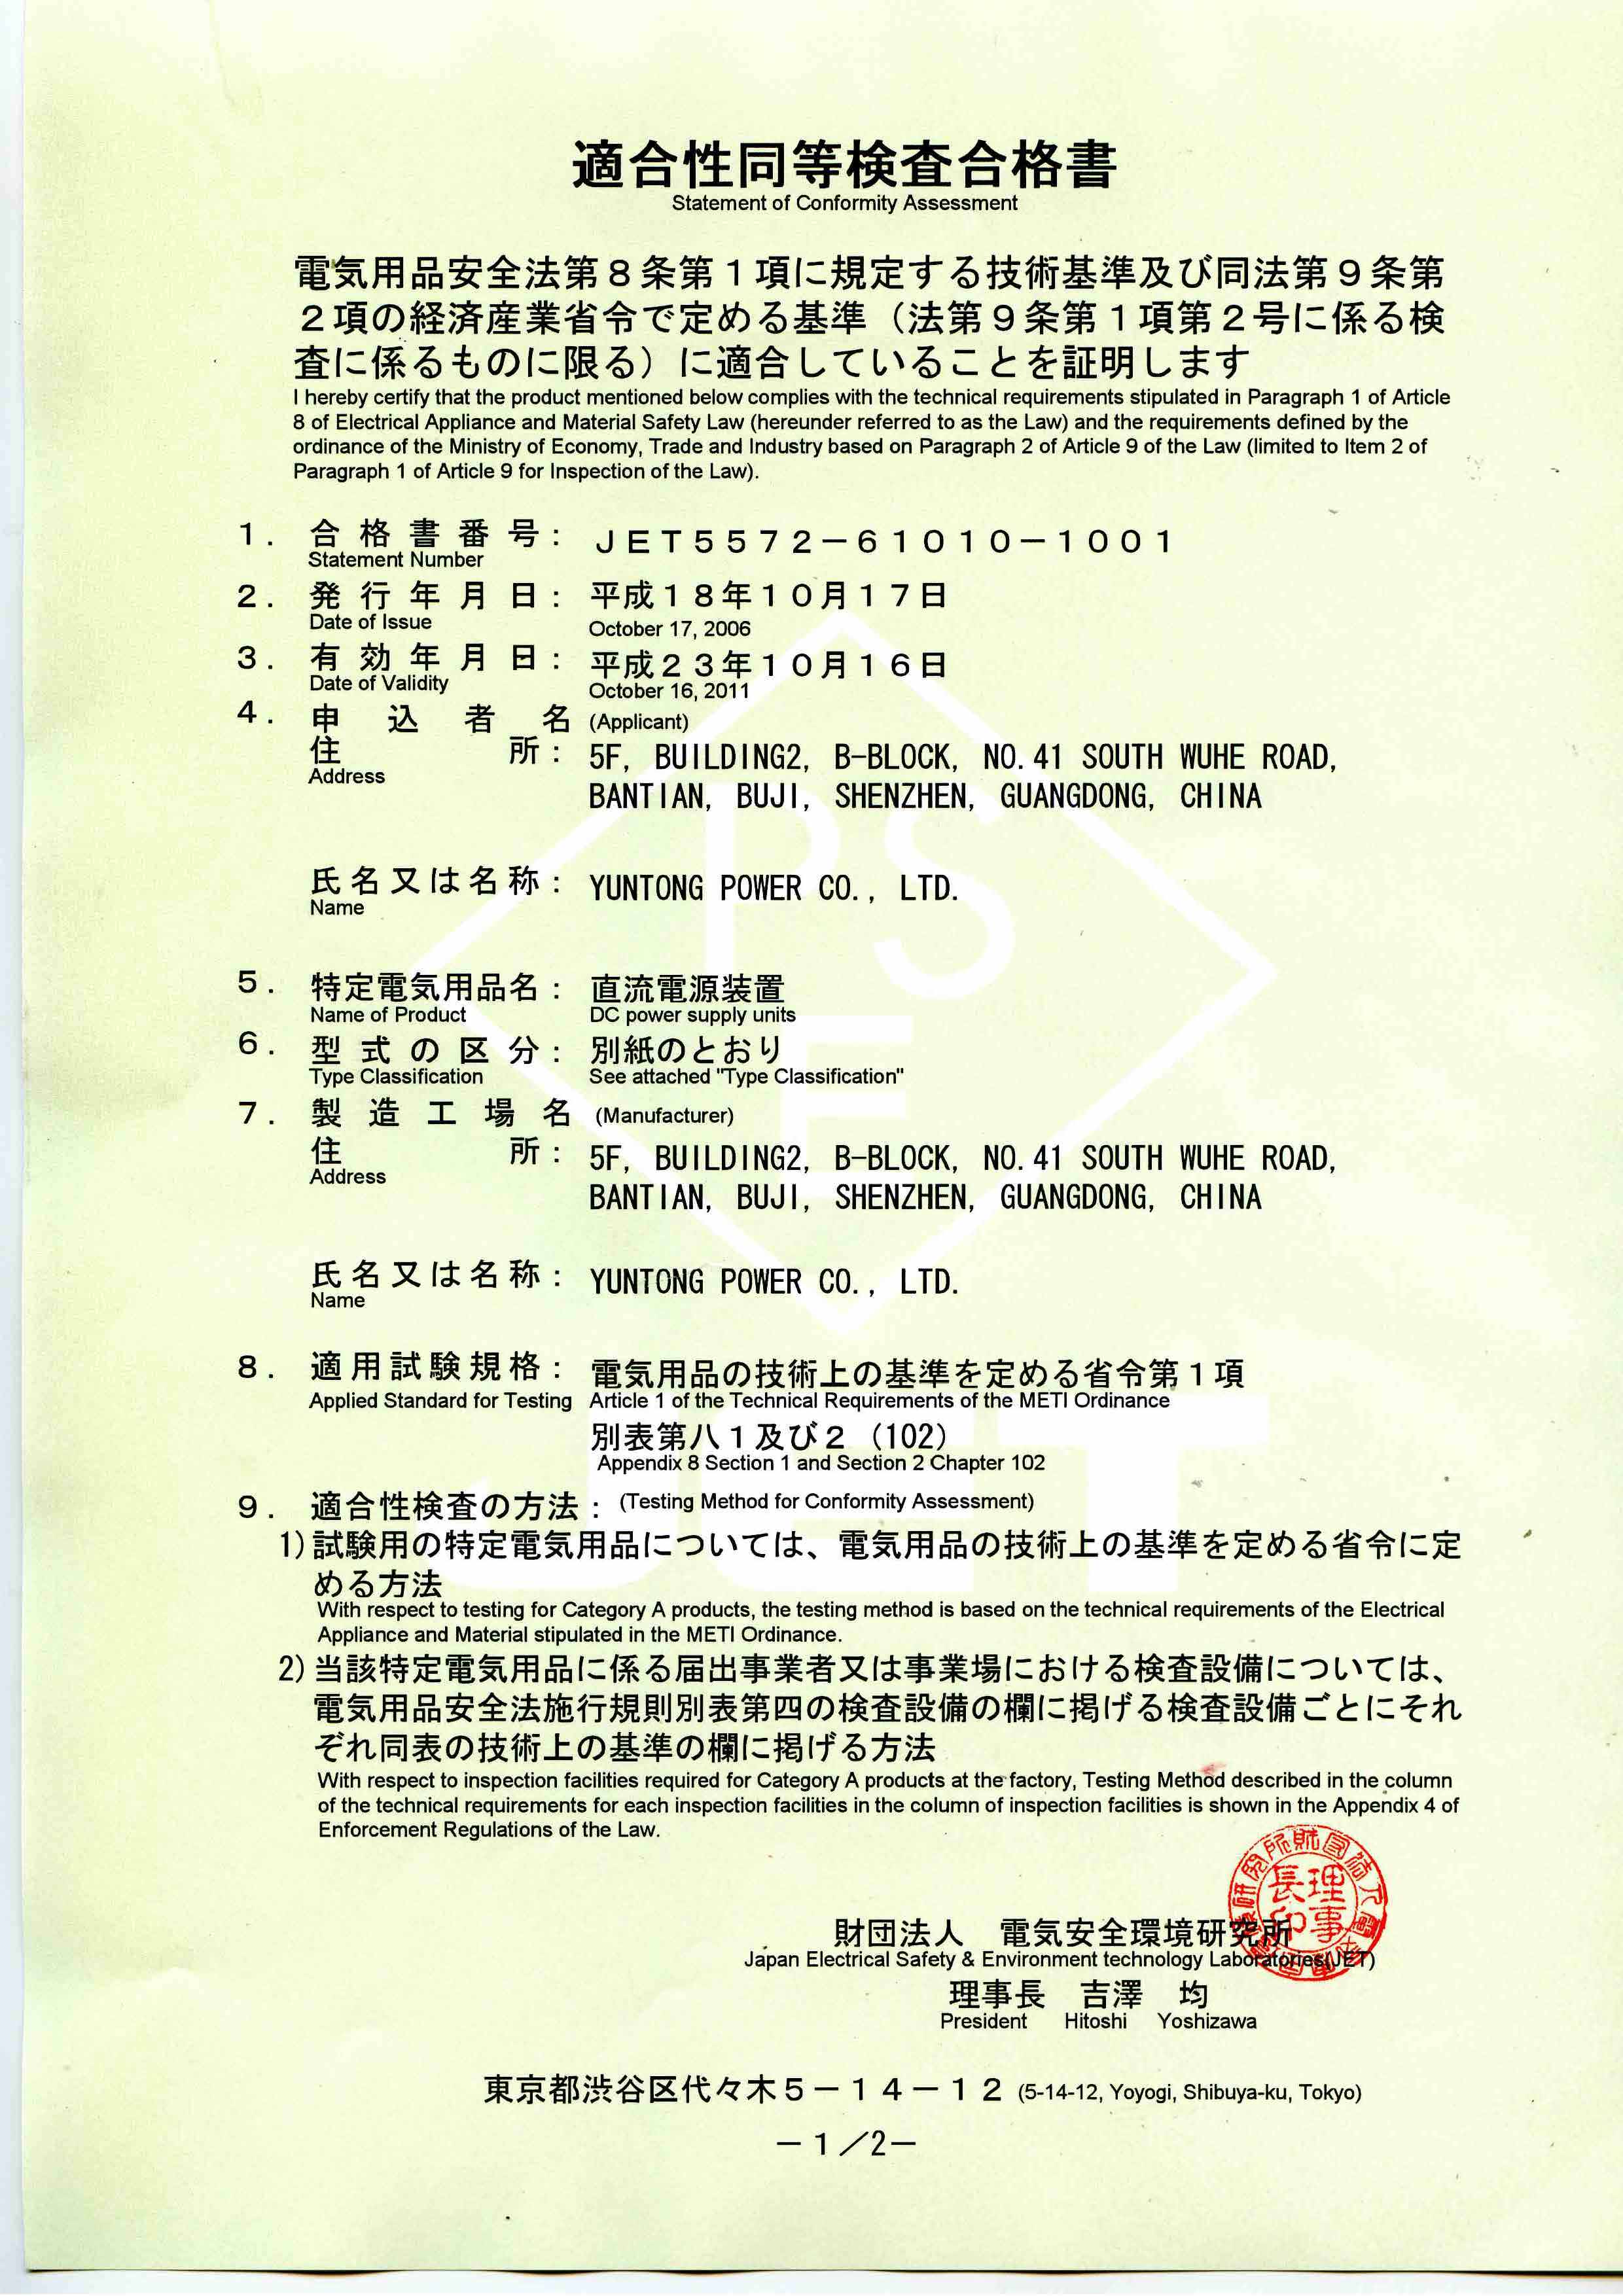 YUNTONG charger PSE certificate - 1